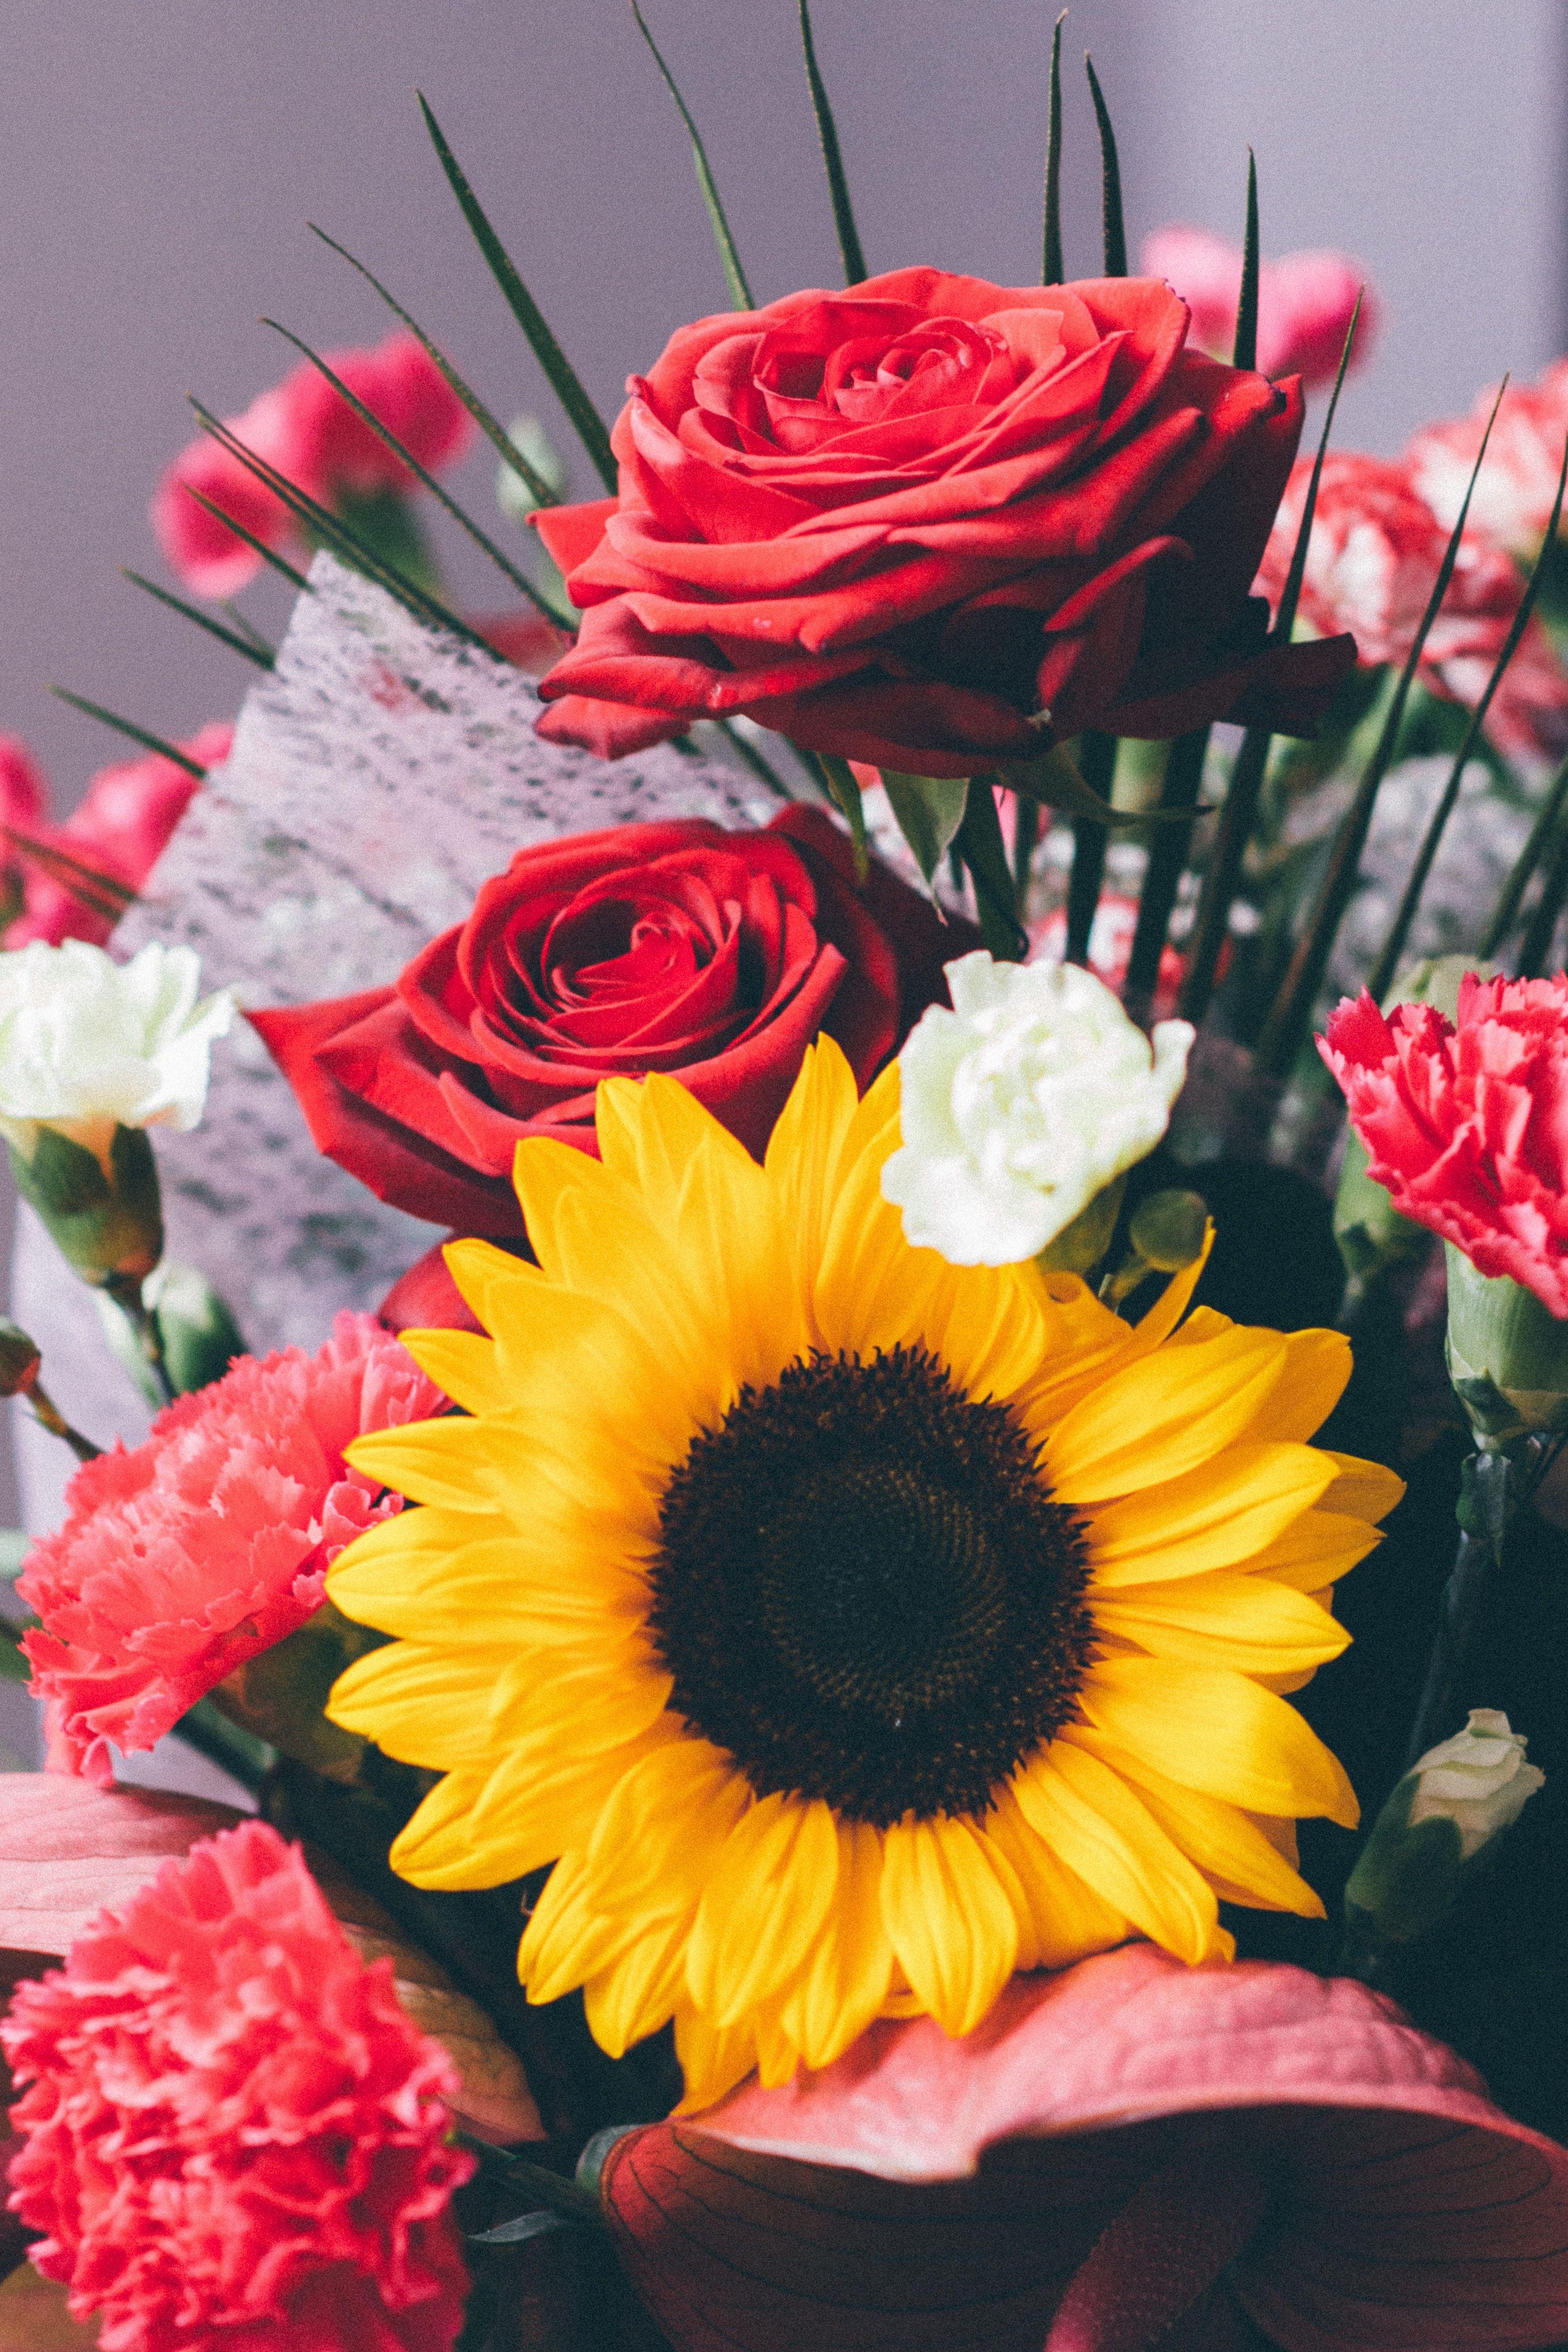 red roses and sunflowers